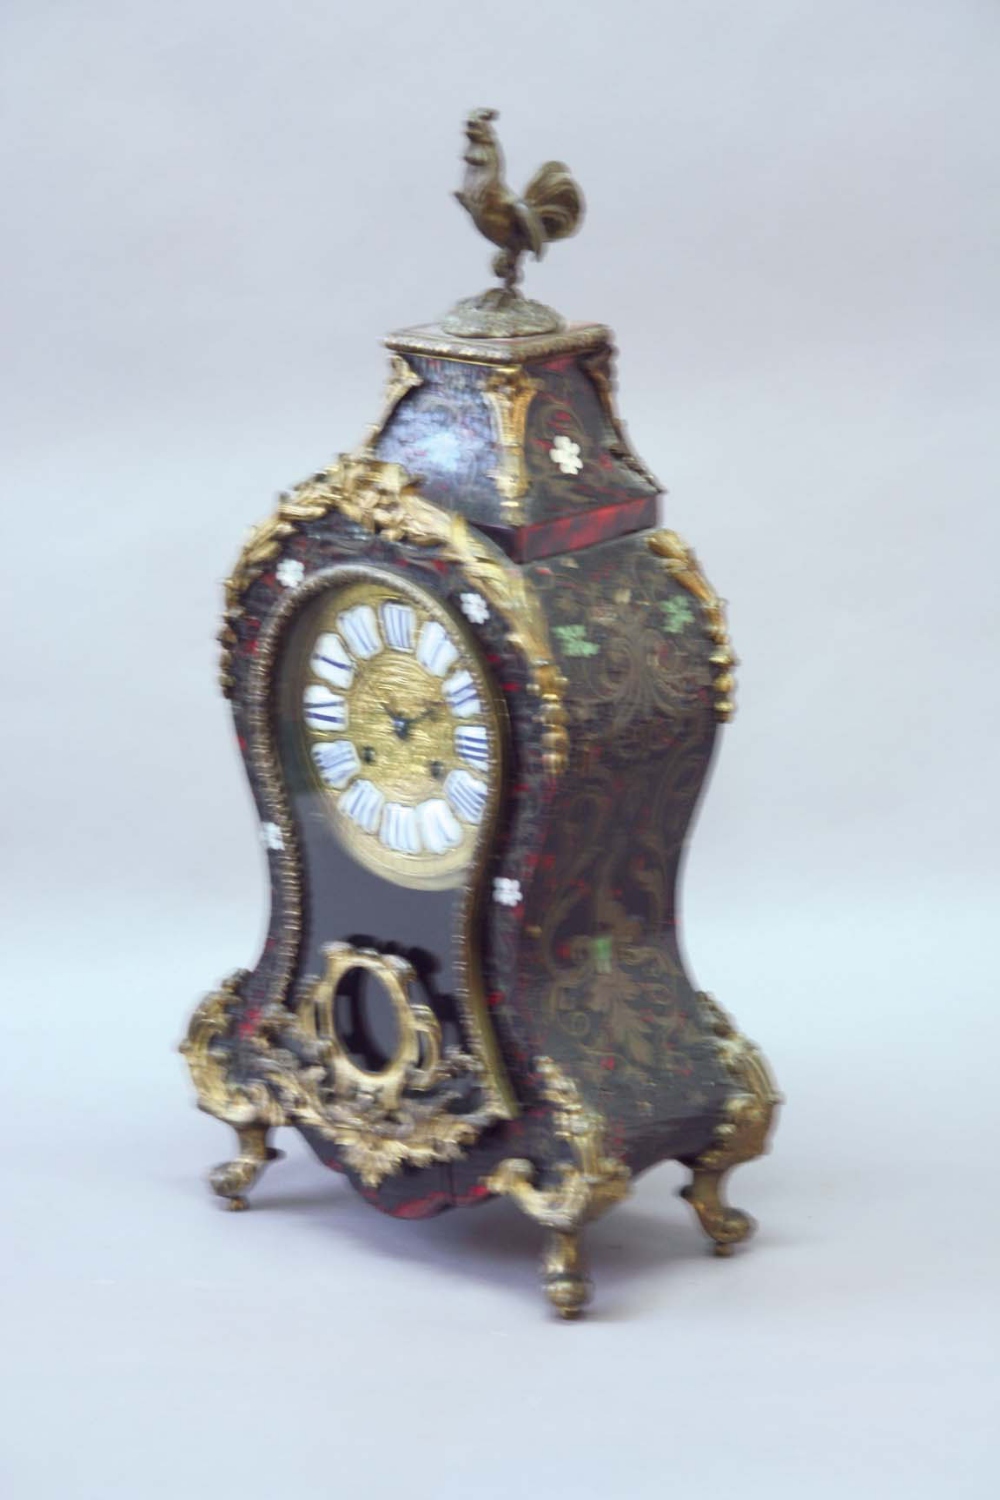 A BOULLE MANTEL CLOCK dial blue and white enamel numerals, movement drum striking on a bell, case